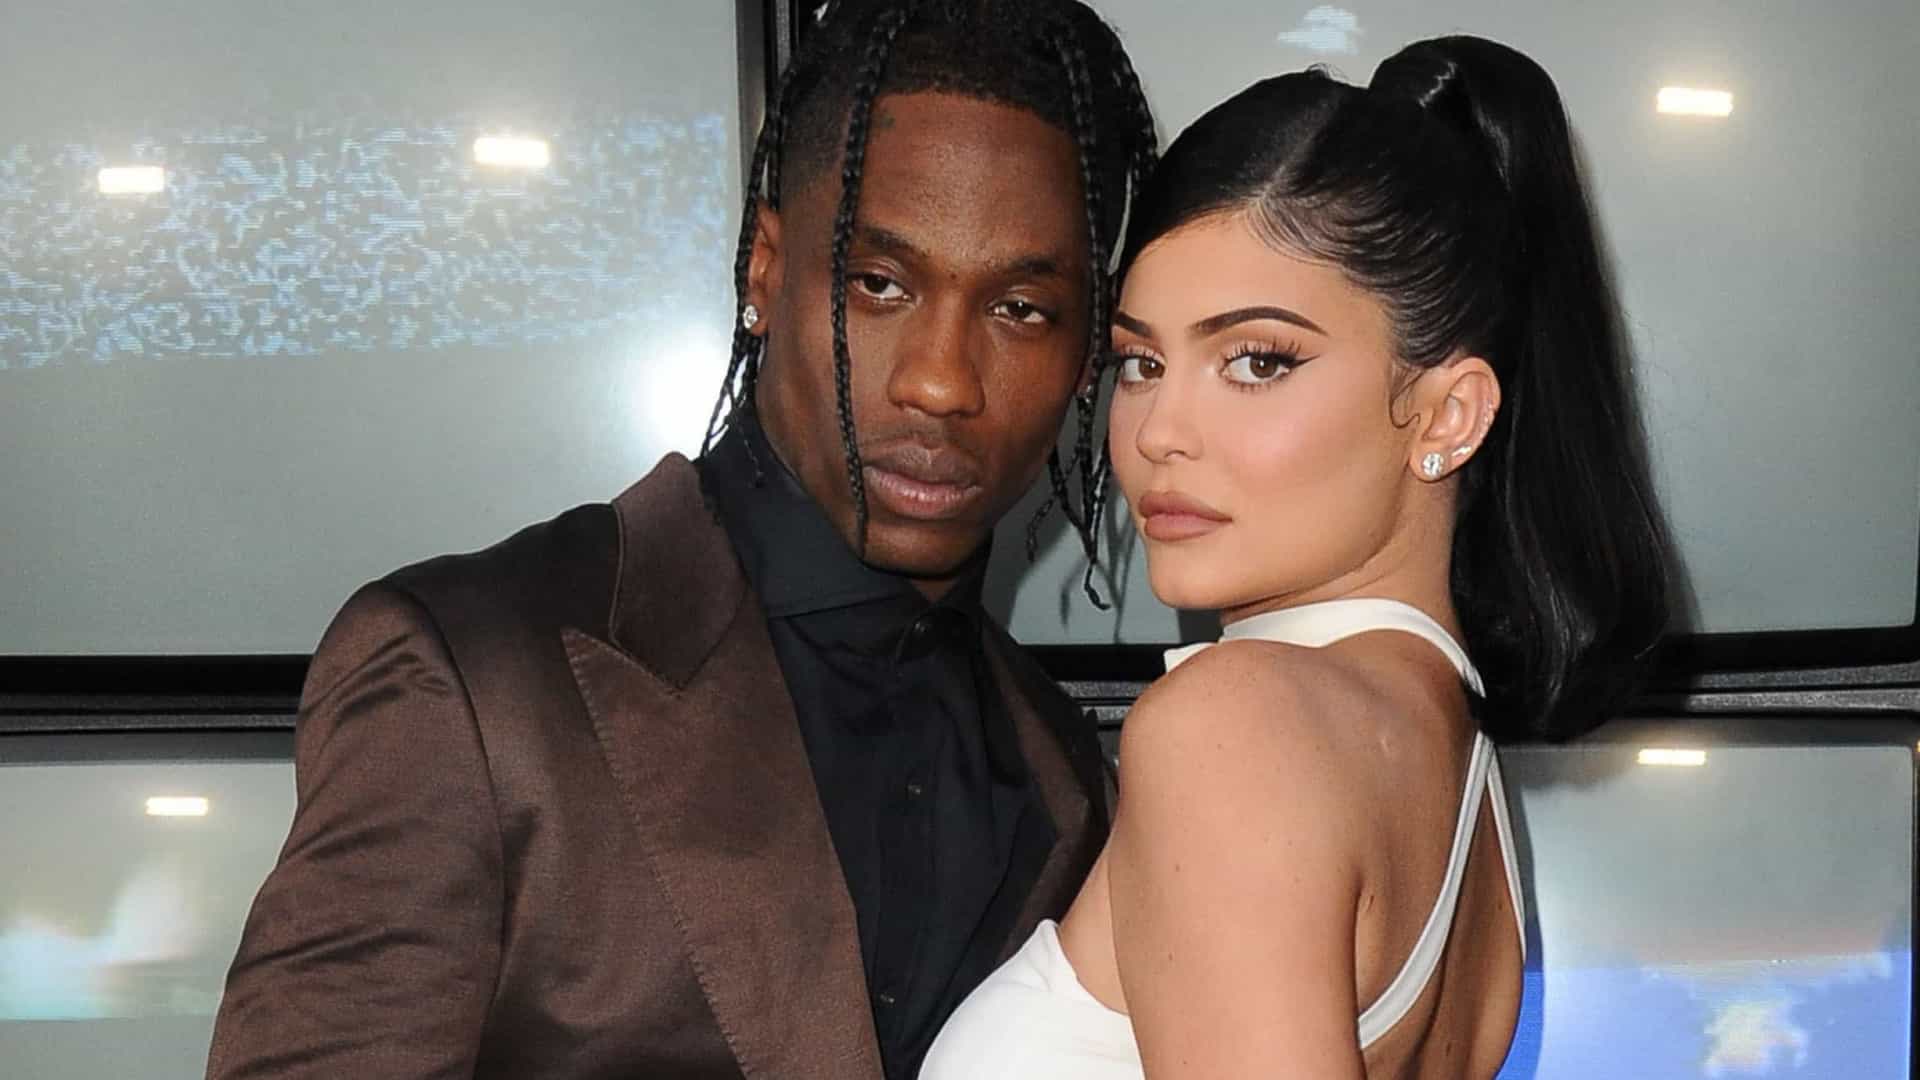                                                                          Travis and Kylie